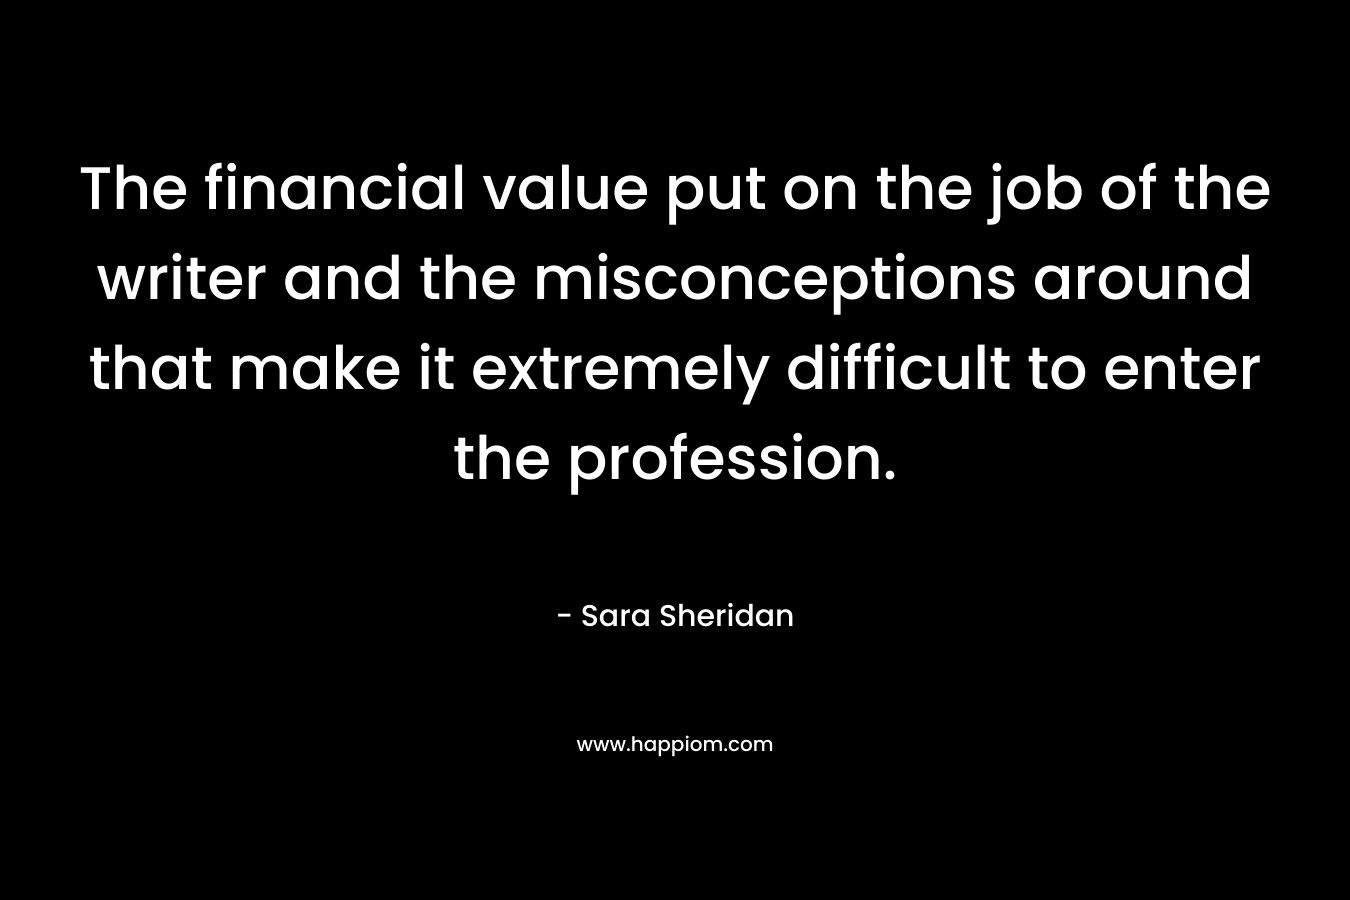 The financial value put on the job of the writer and the misconceptions around that make it extremely difficult to enter the profession. – Sara Sheridan